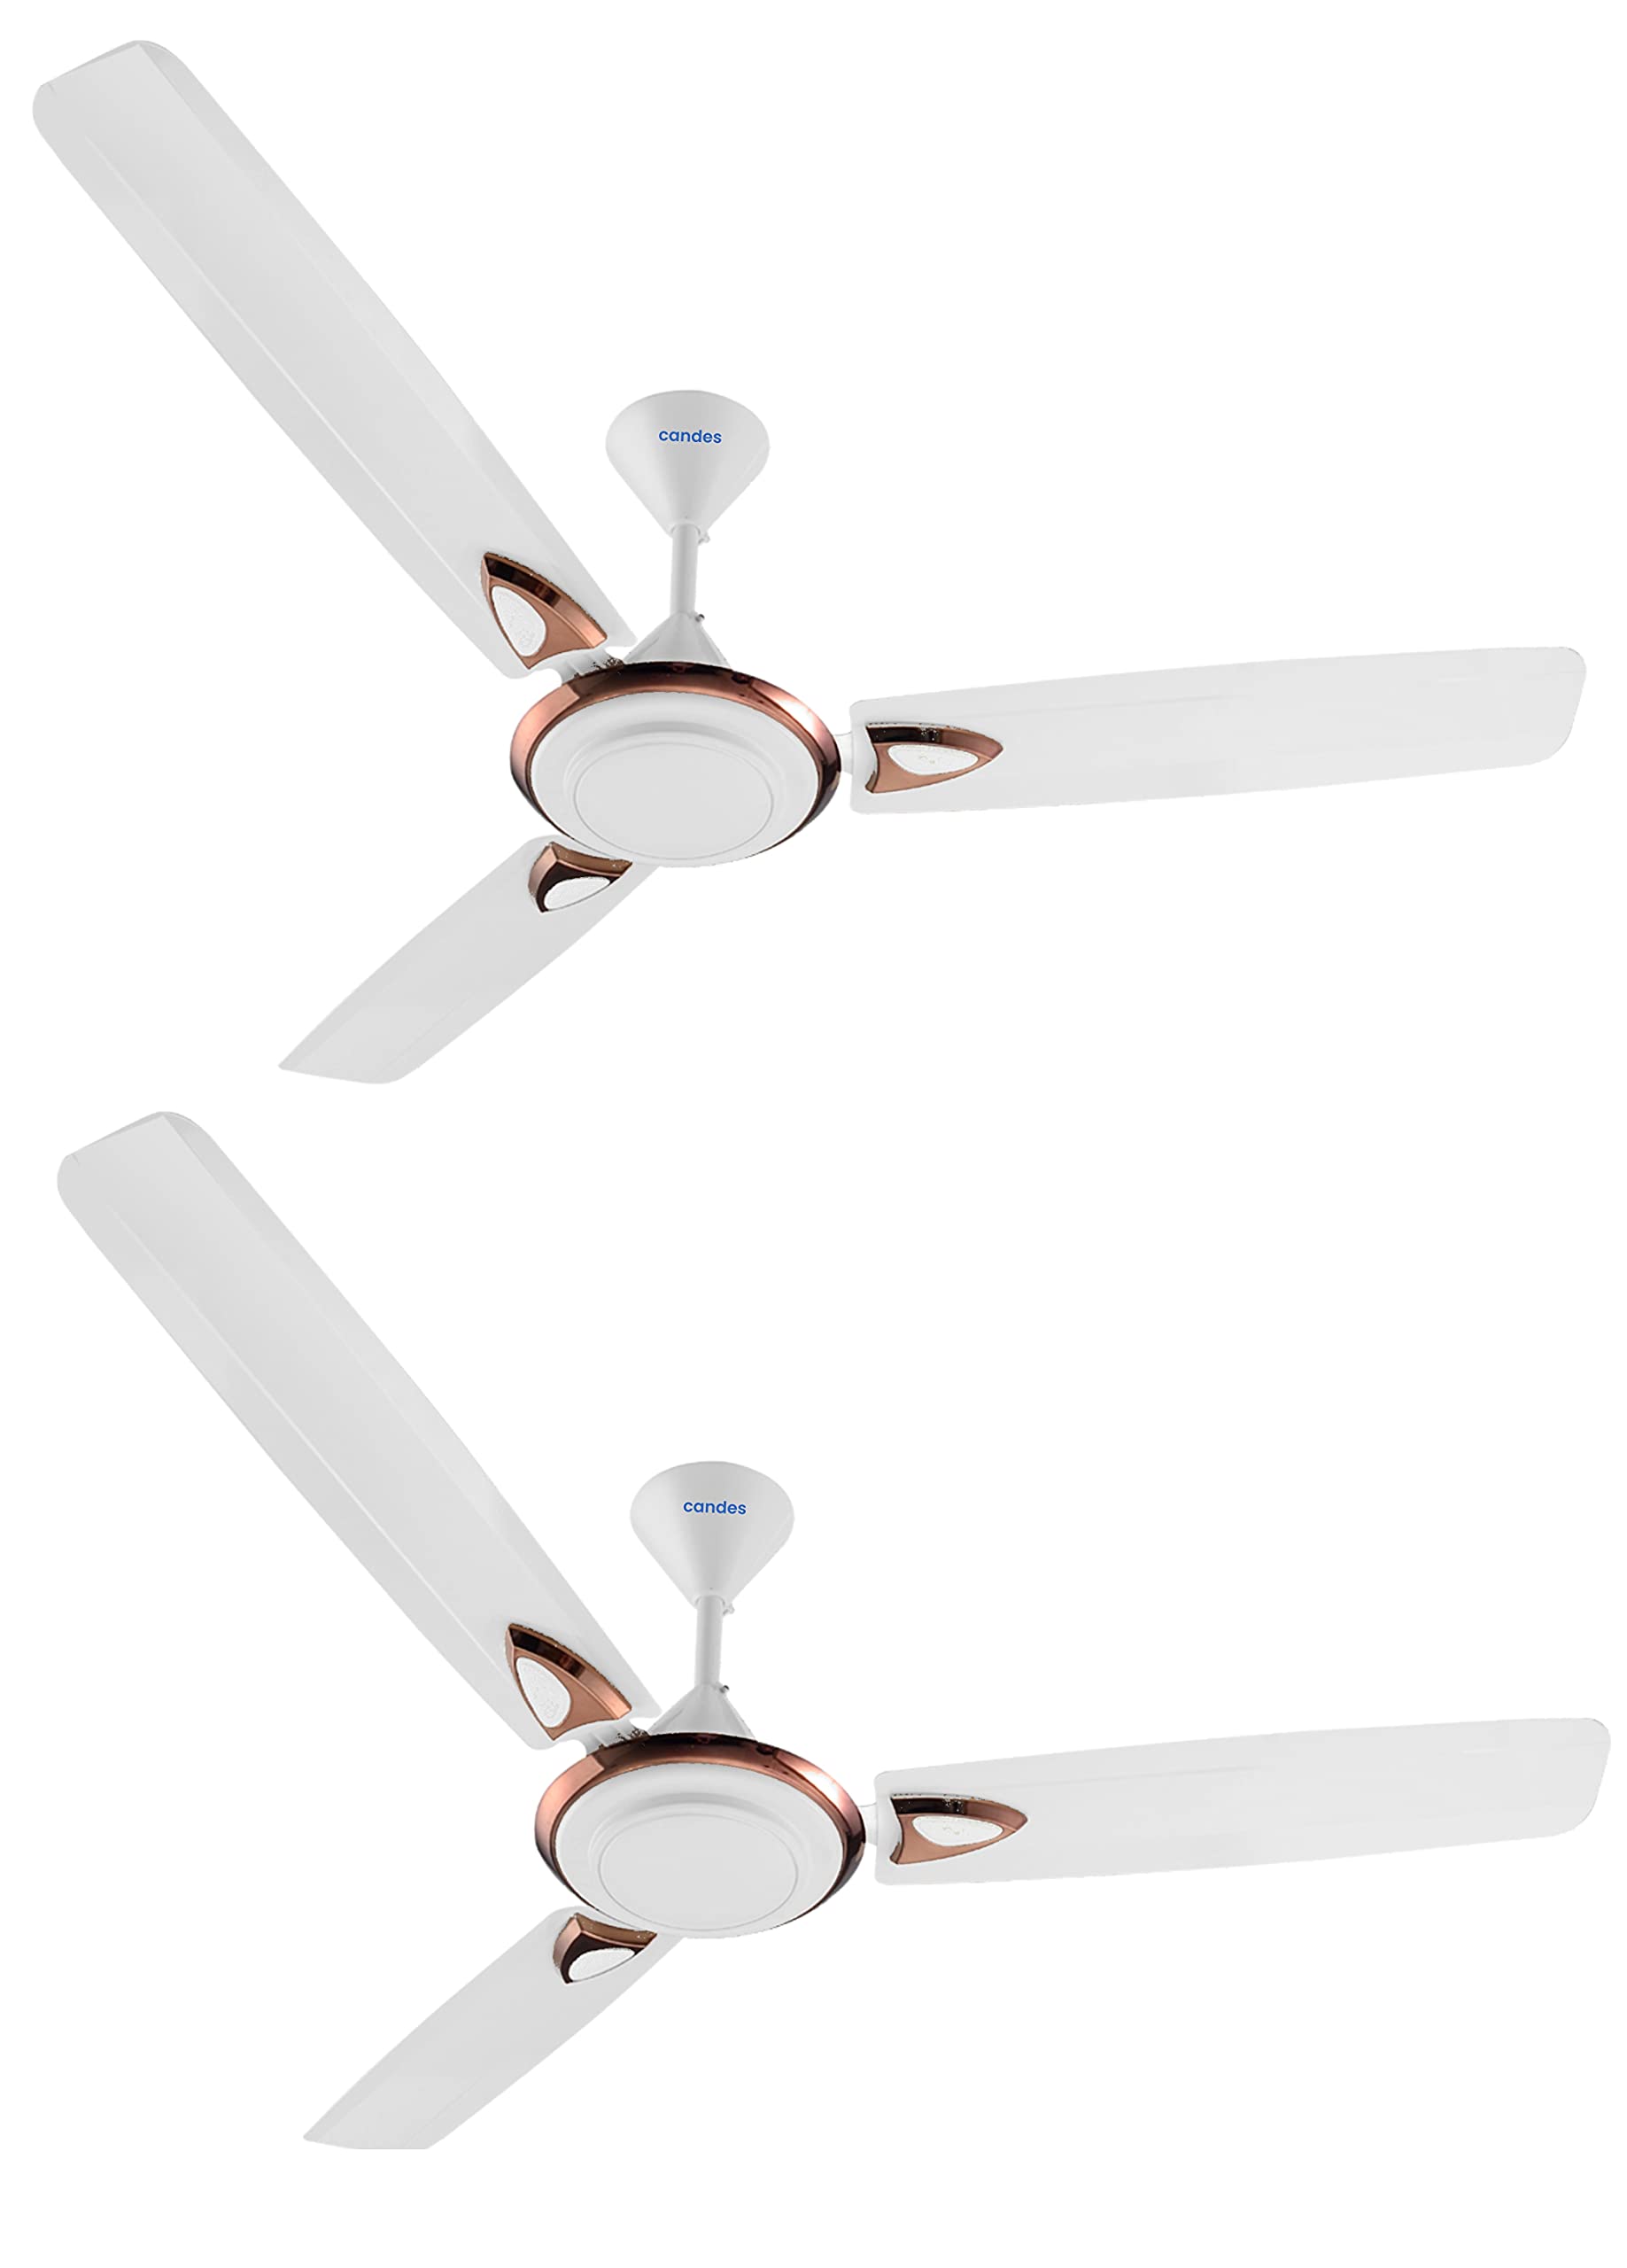 Candes Breeza 1200mm/48 inch High Speed Anti dust Decorative 5 Star Rated Ceiling Fan 400 RPM with 3 Years Warranty (Pack of 1,Coffee Brown) (White, Pack of 2)